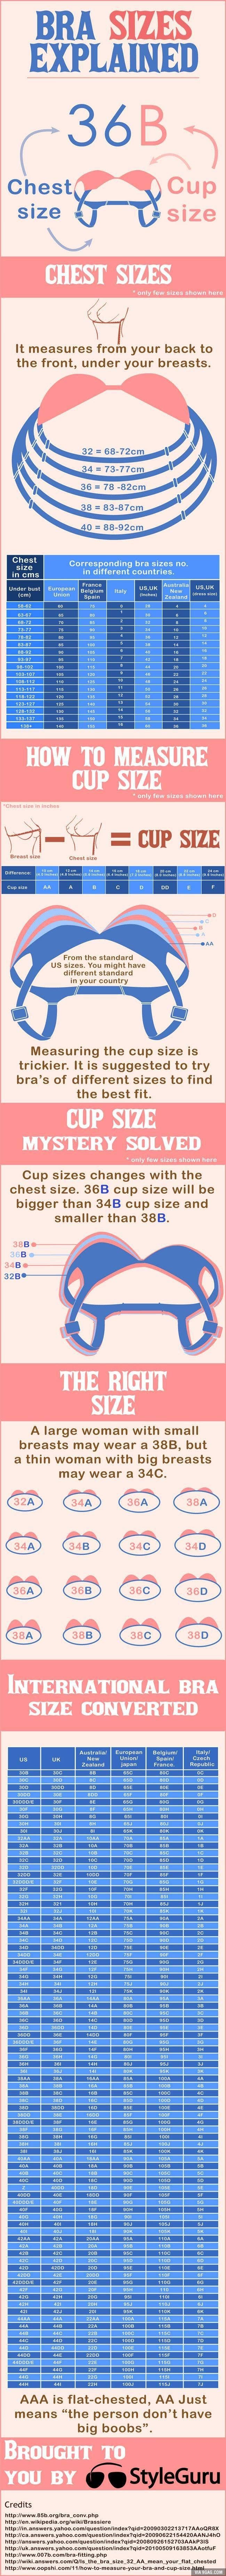 The male equivalent to the push up bra - 9GAG